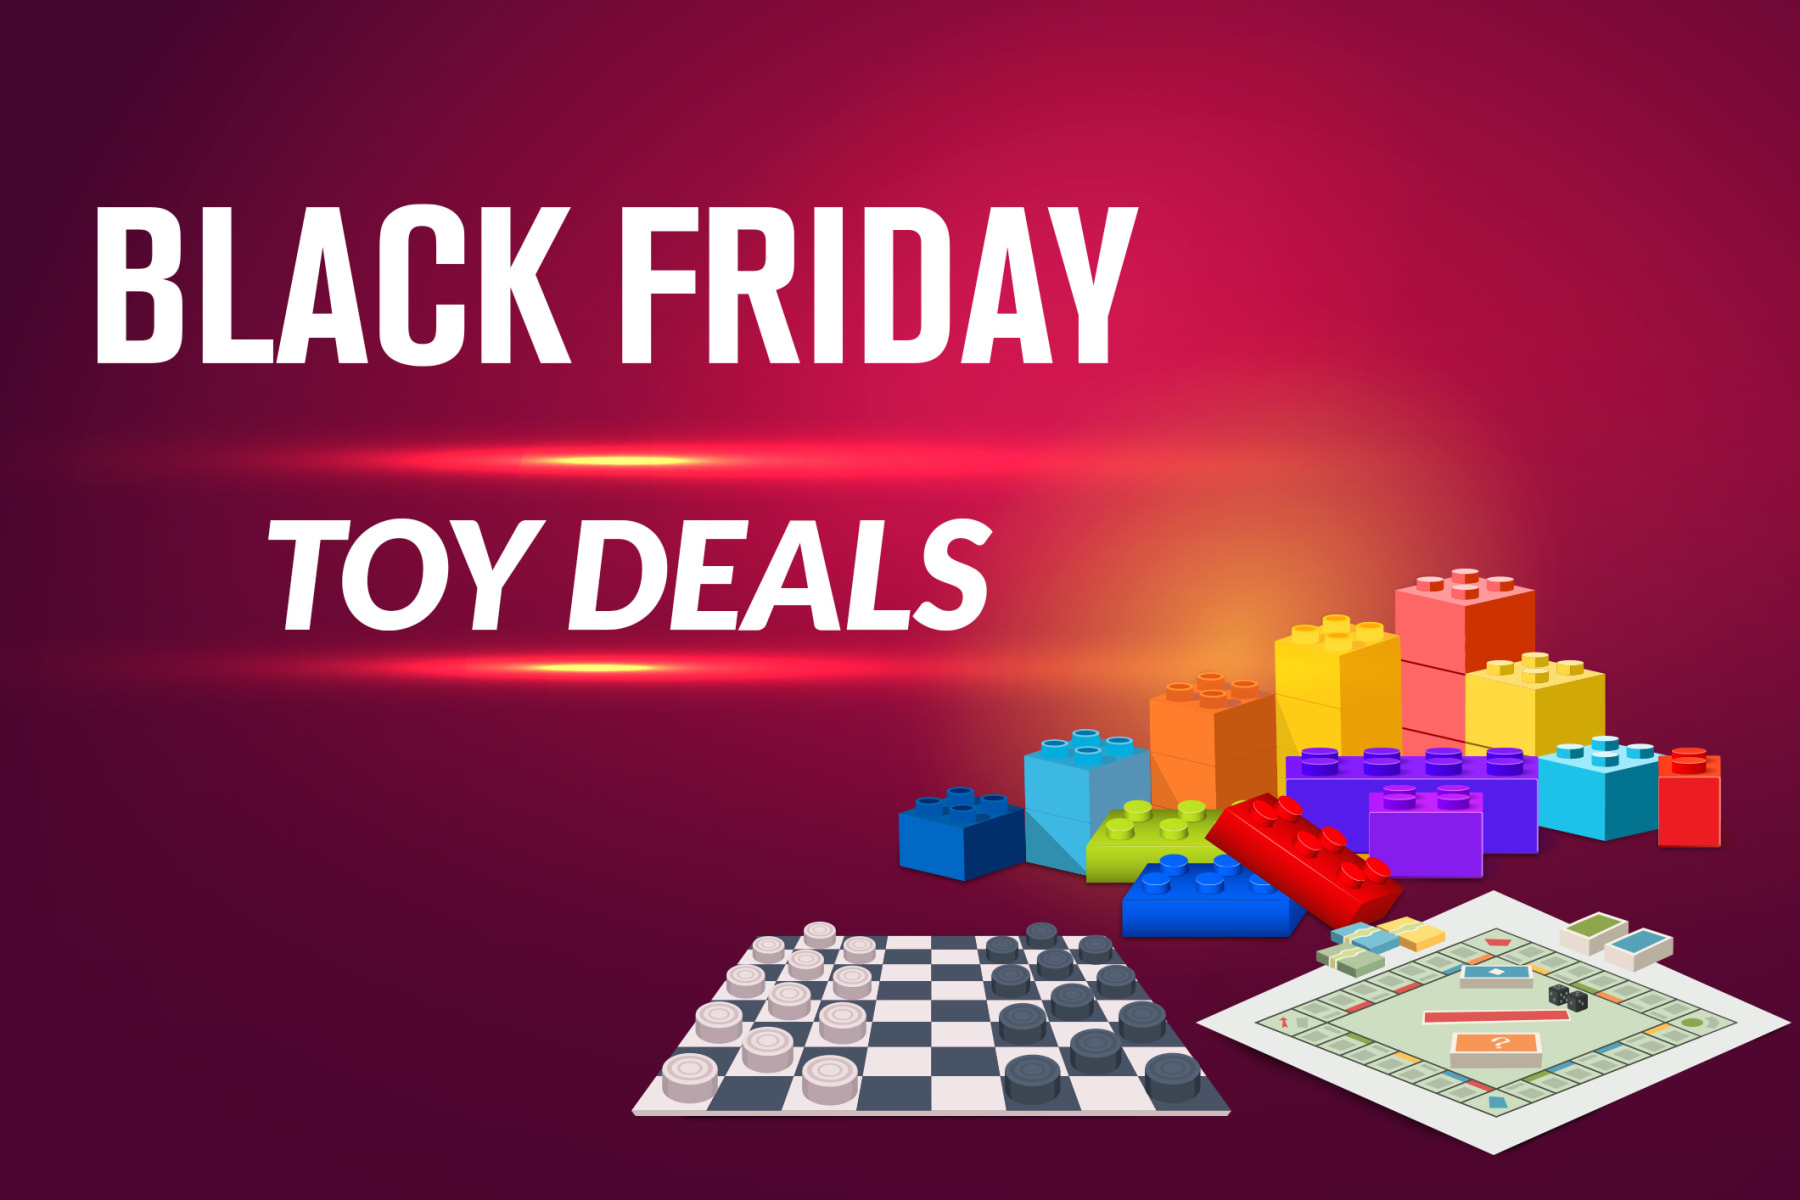 games and LEGO bricks next to Black Friday Toy Deals text